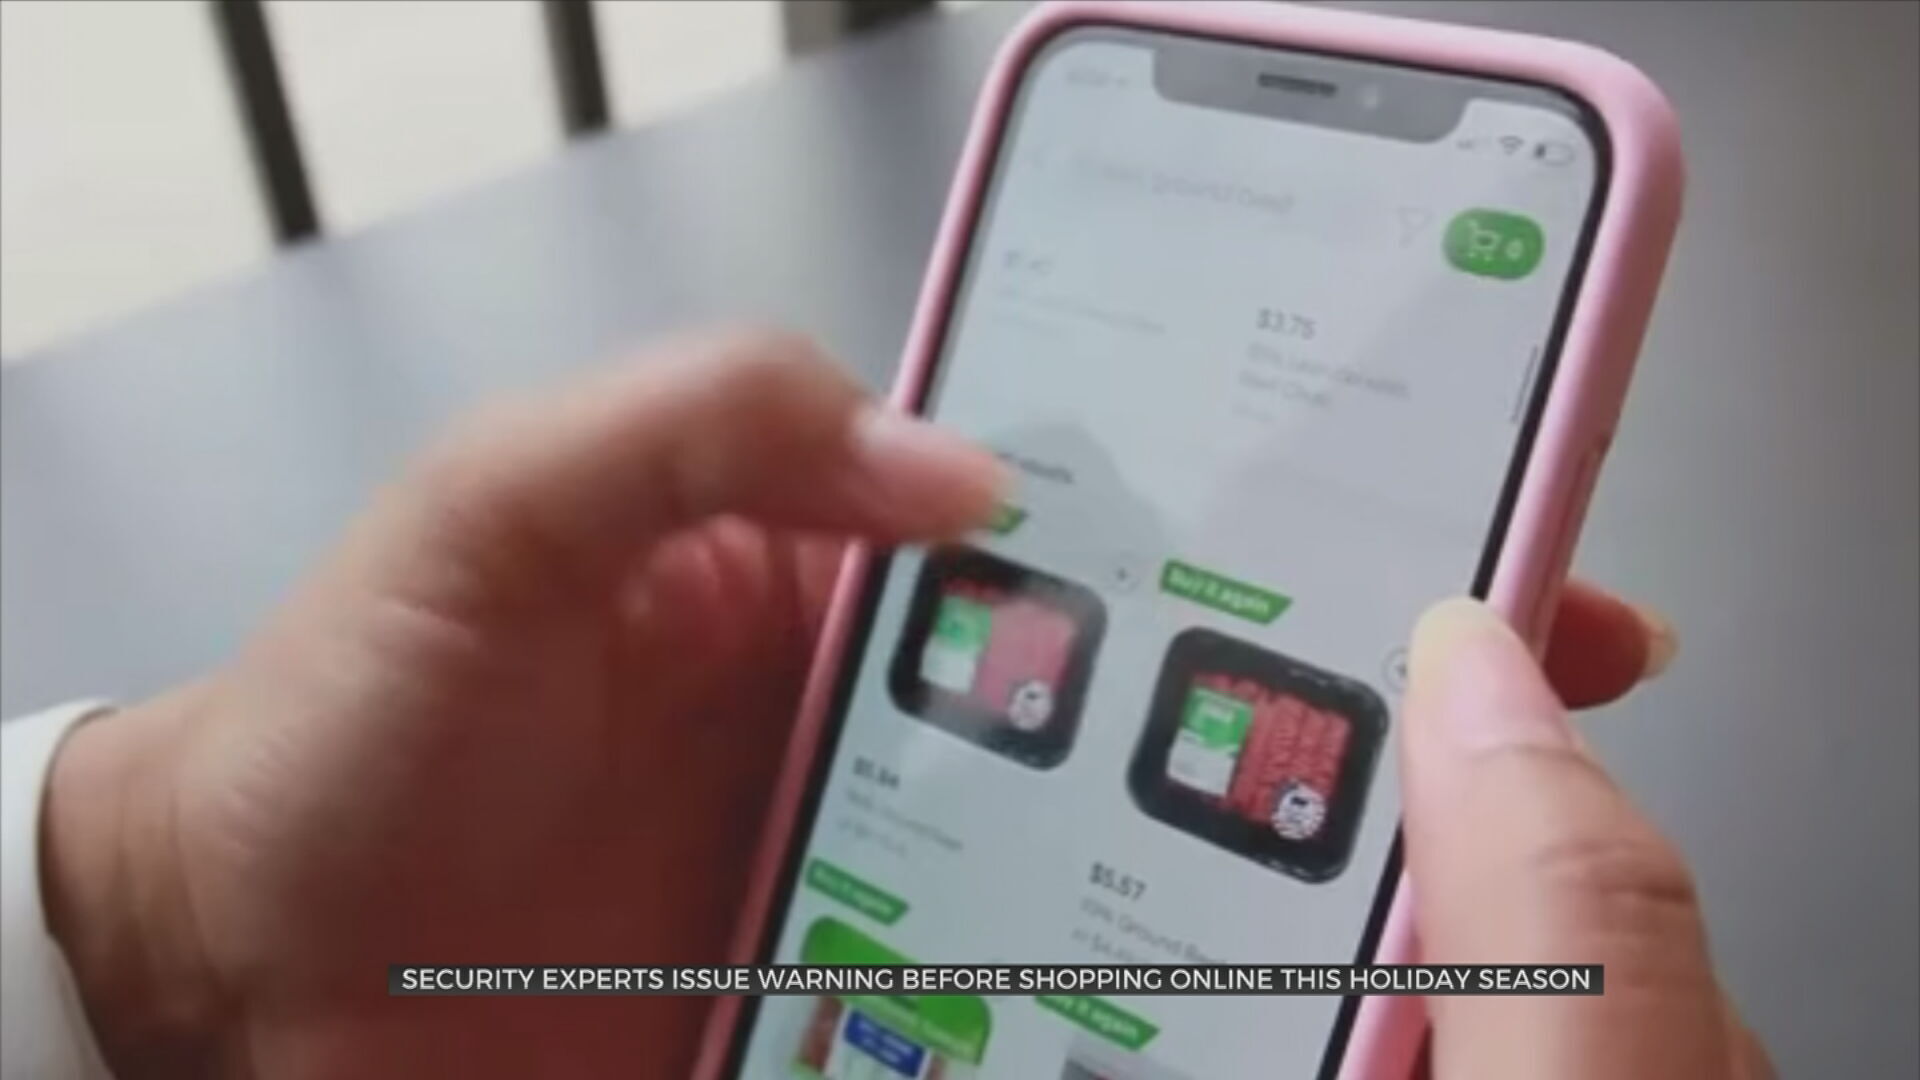 Security Experts Issue Warning About Shopping Online This Holiday Season 